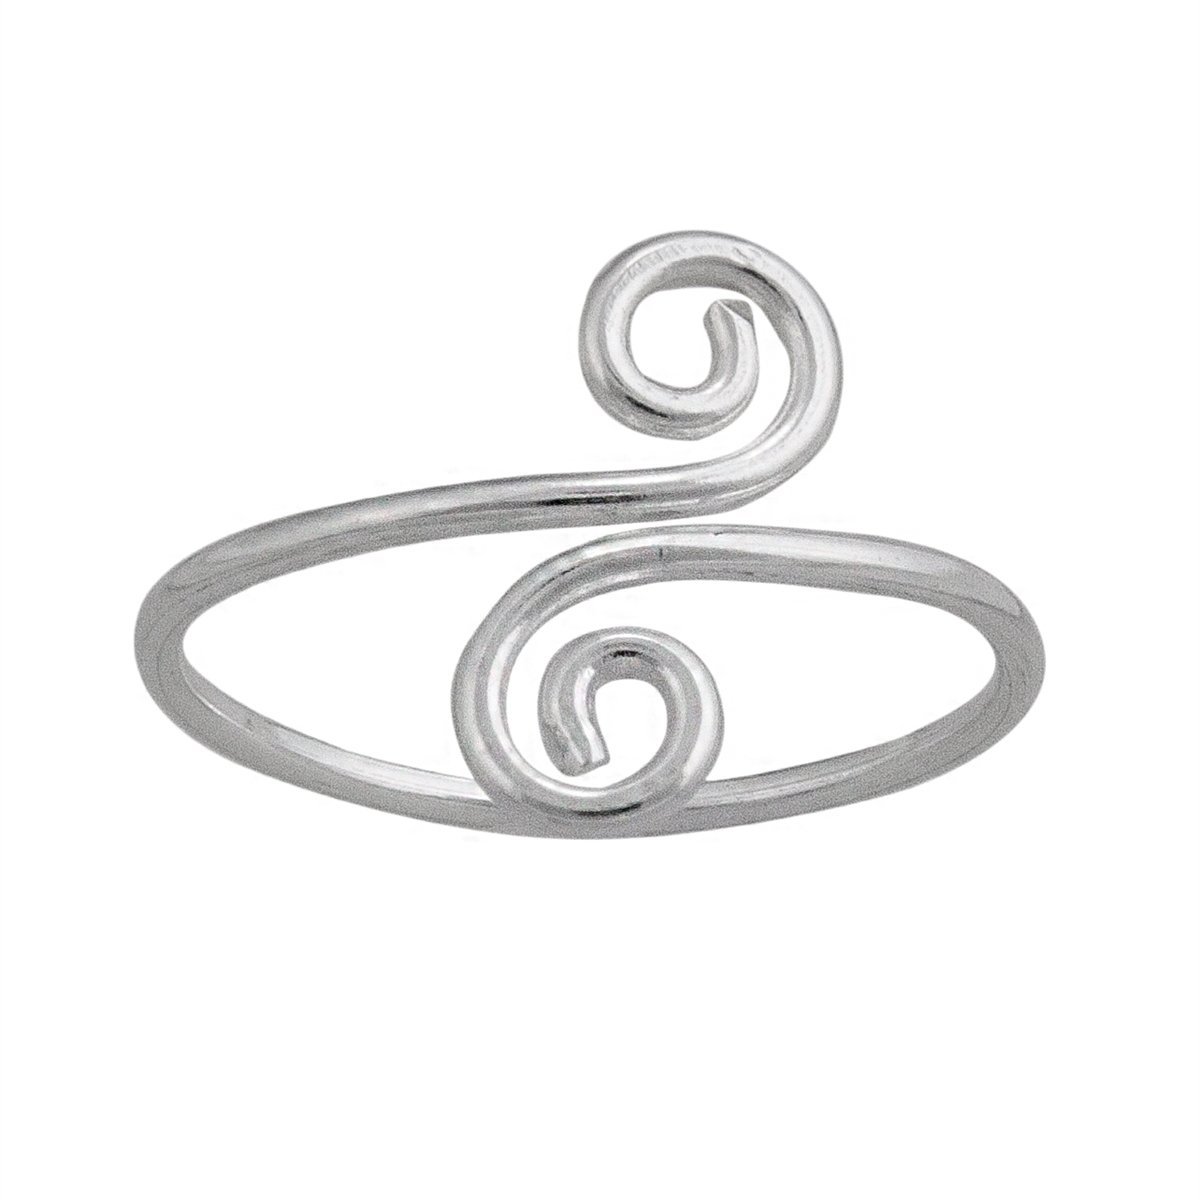 Buy Sterling Silver Spiral Ring, Swirl Ring, Boho Ring Silver, Unusual Ring,  Statement Ring, Modern Ring, Double Spiral Ring, Gypsy Ring Online in India  - Etsy